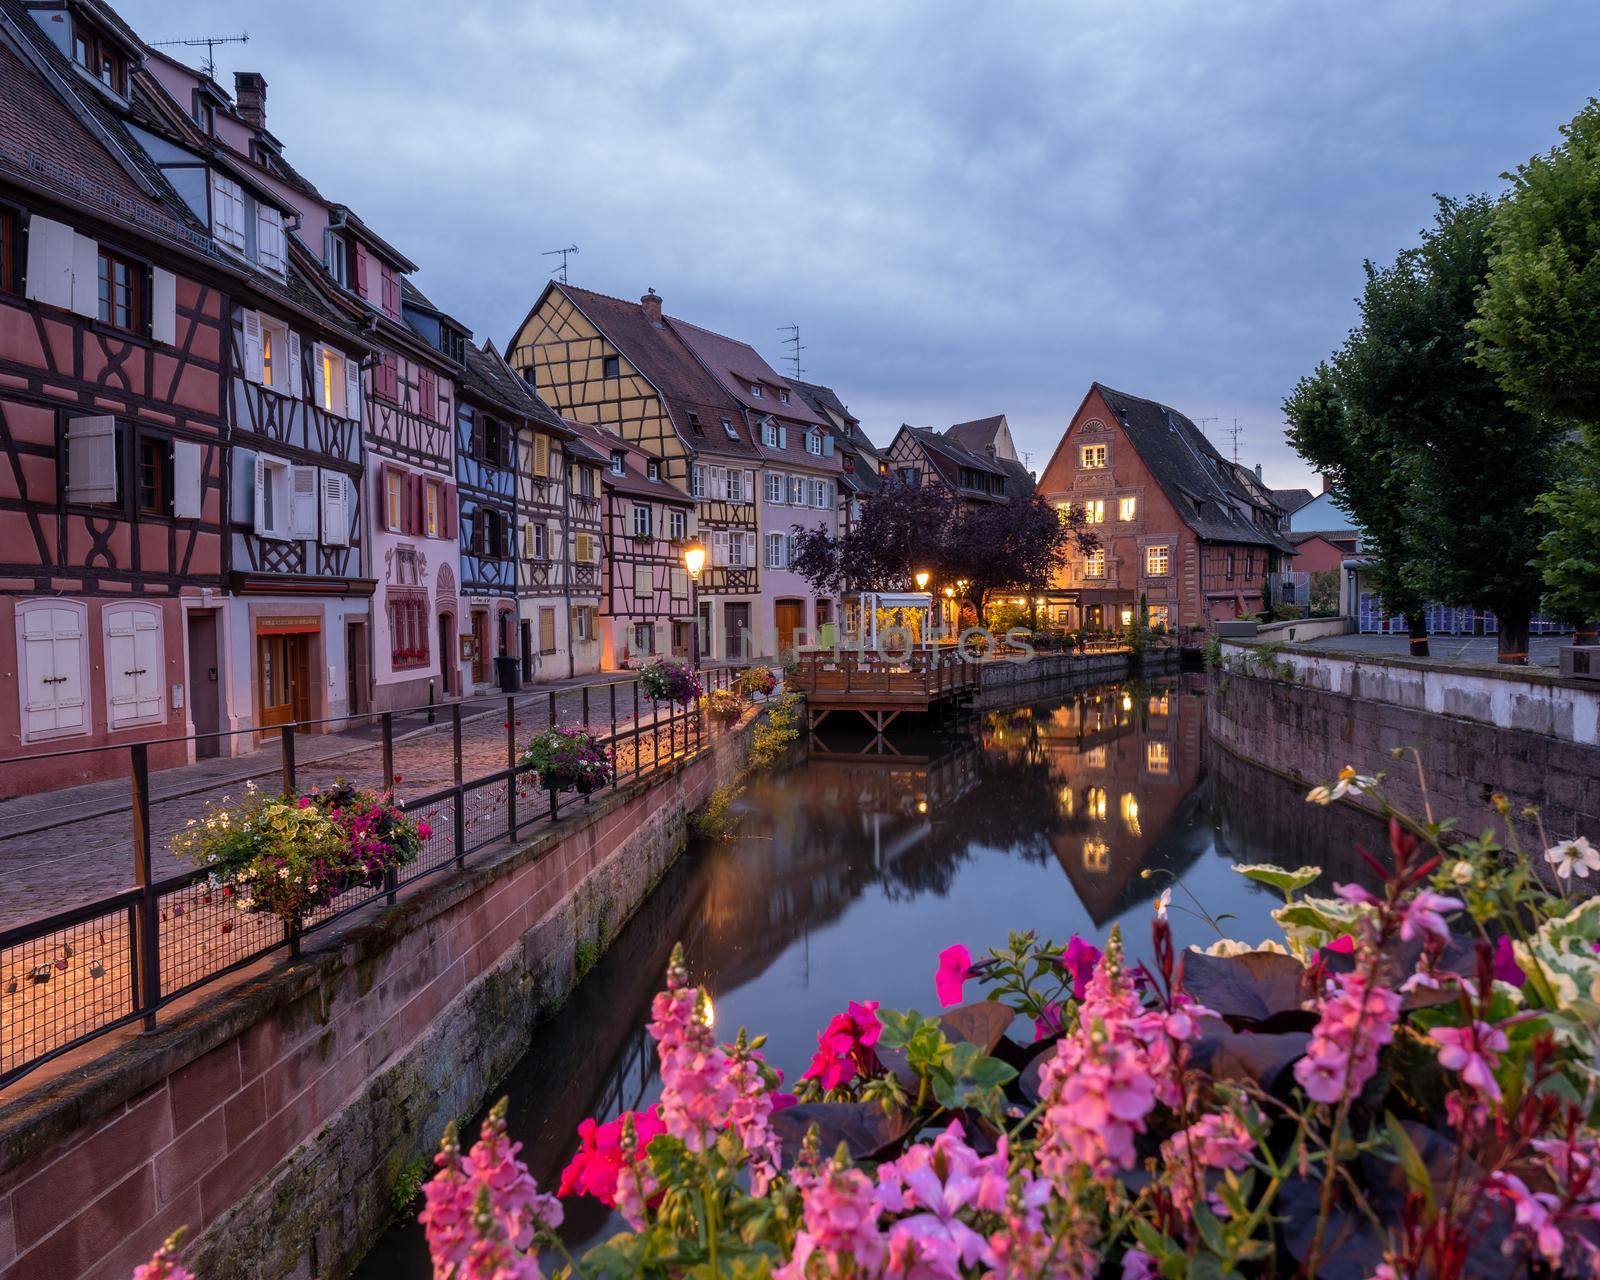 Colmar, Alsace, France. Petite Venice, water canal and traditional half timbered houses. Colmar is a charming town in Alsace, France. Beautiful view of colorful romantic city Colmar